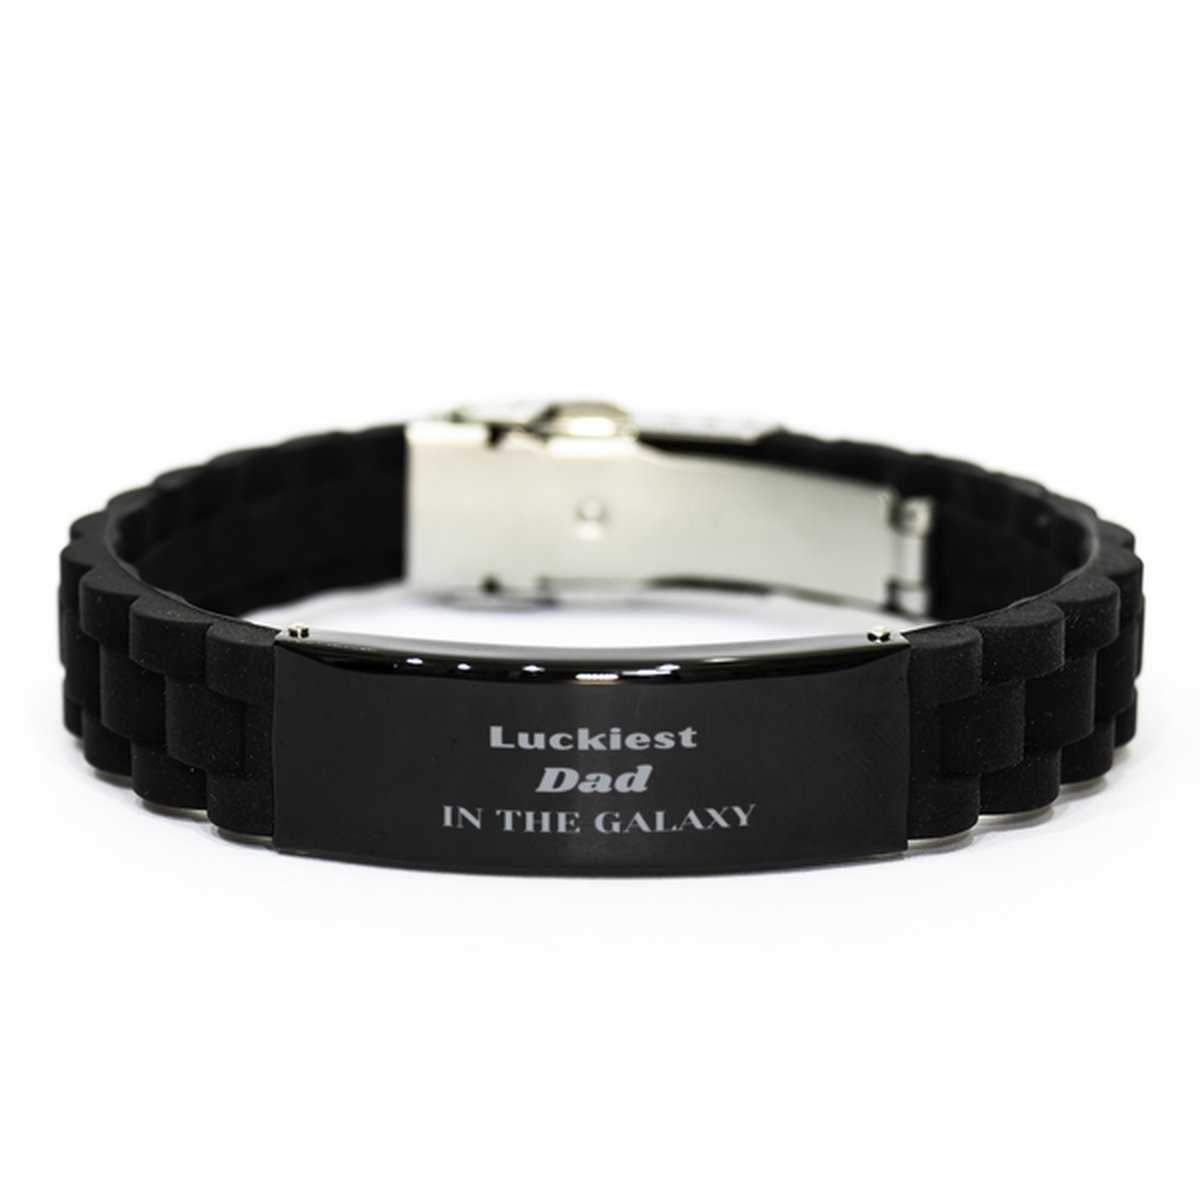 Luckiest Dad in the Galaxy, To My Dad Engraved Gifts, Christmas Dad Black Glidelock Clasp Bracelet Gifts, X-mas Birthday Unique Gifts For Dad Men Women